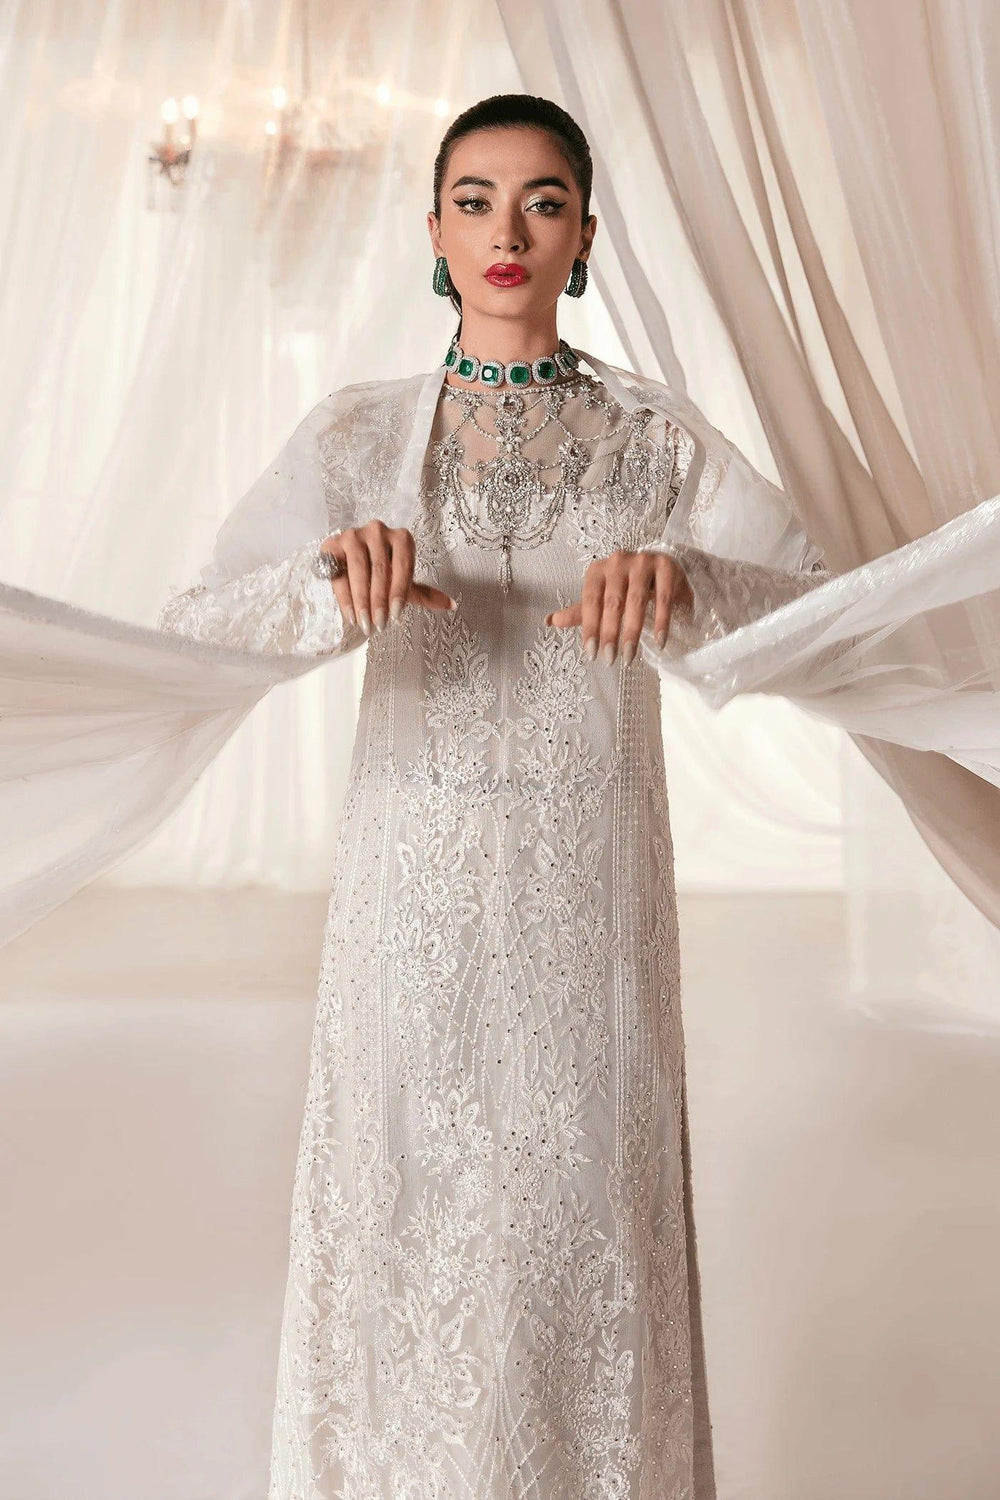 Nilofer Shahid - Pearl White Embroidered Net Shirt and Pure Lace Fabric Pants with Premium Organza Dupatta - Divine Love - 3 Piece - Studio by TCS